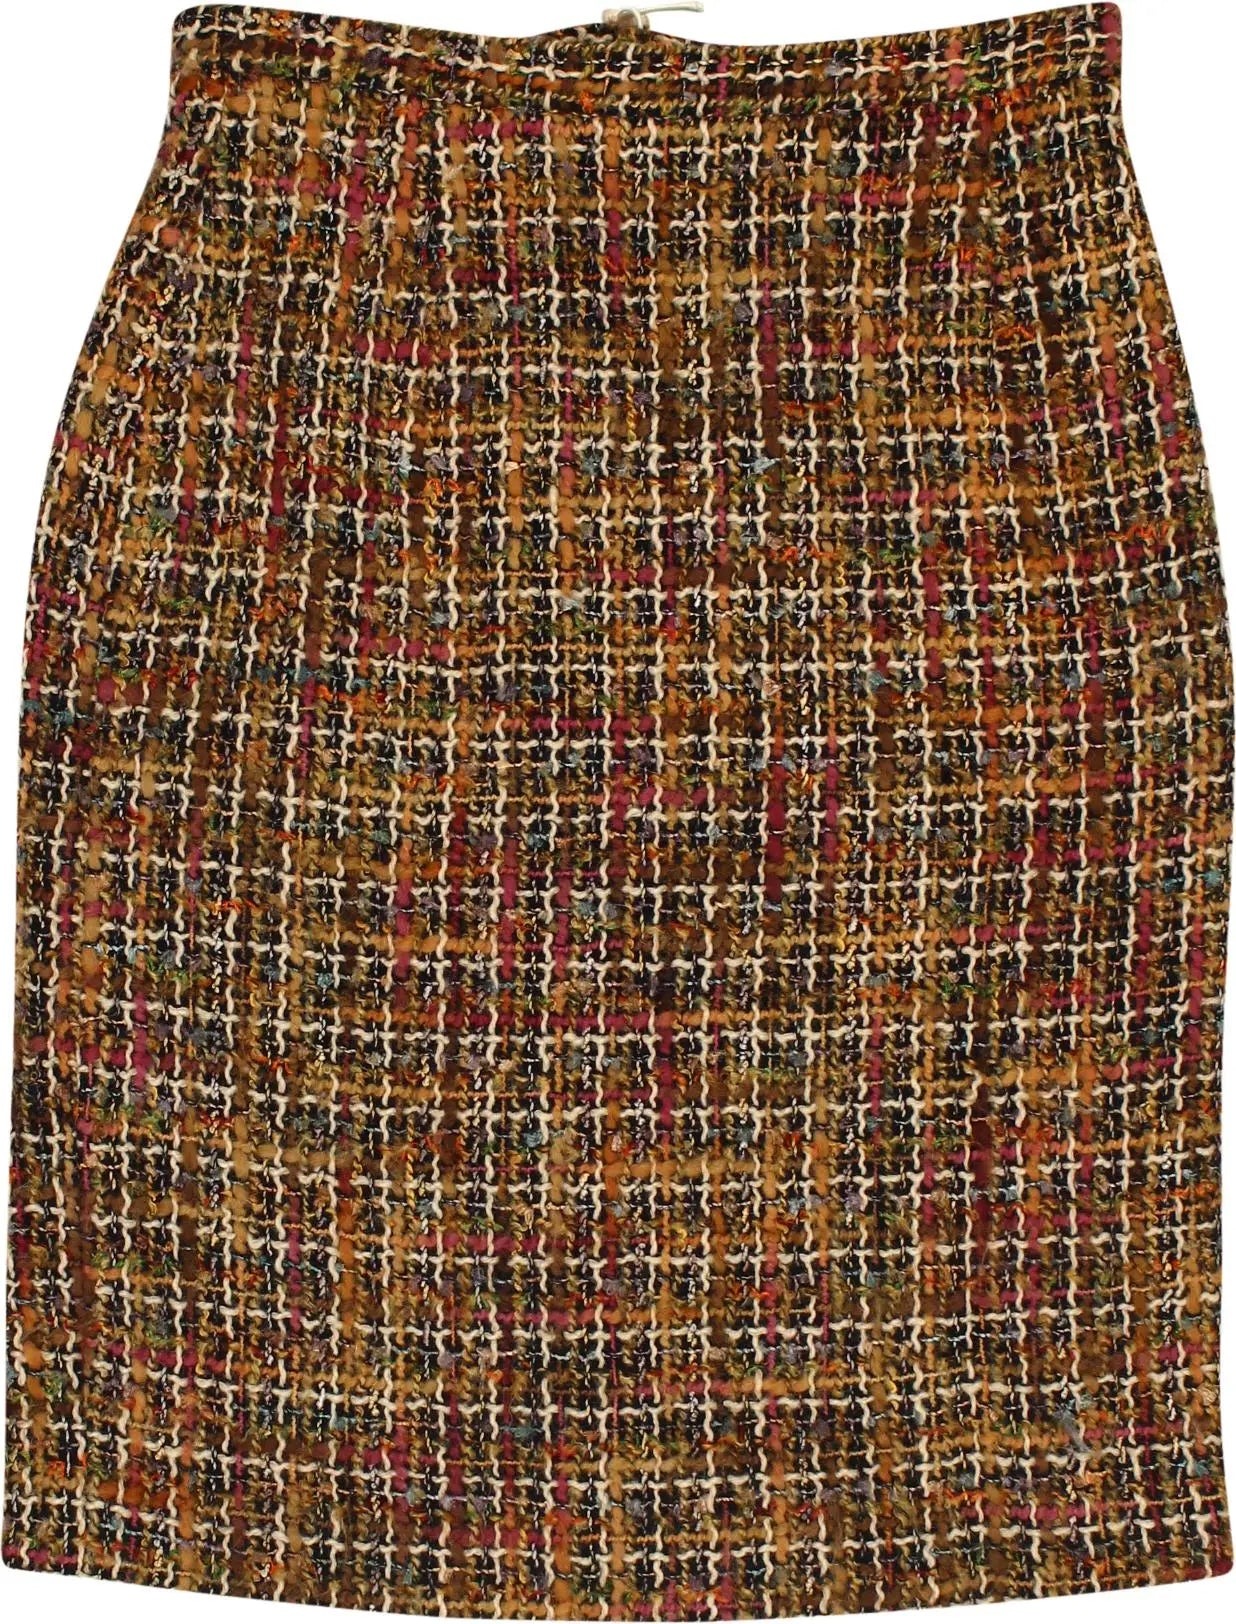 Unknown - Tweed pencil skirt- ThriftTale.com - Vintage and second handclothing